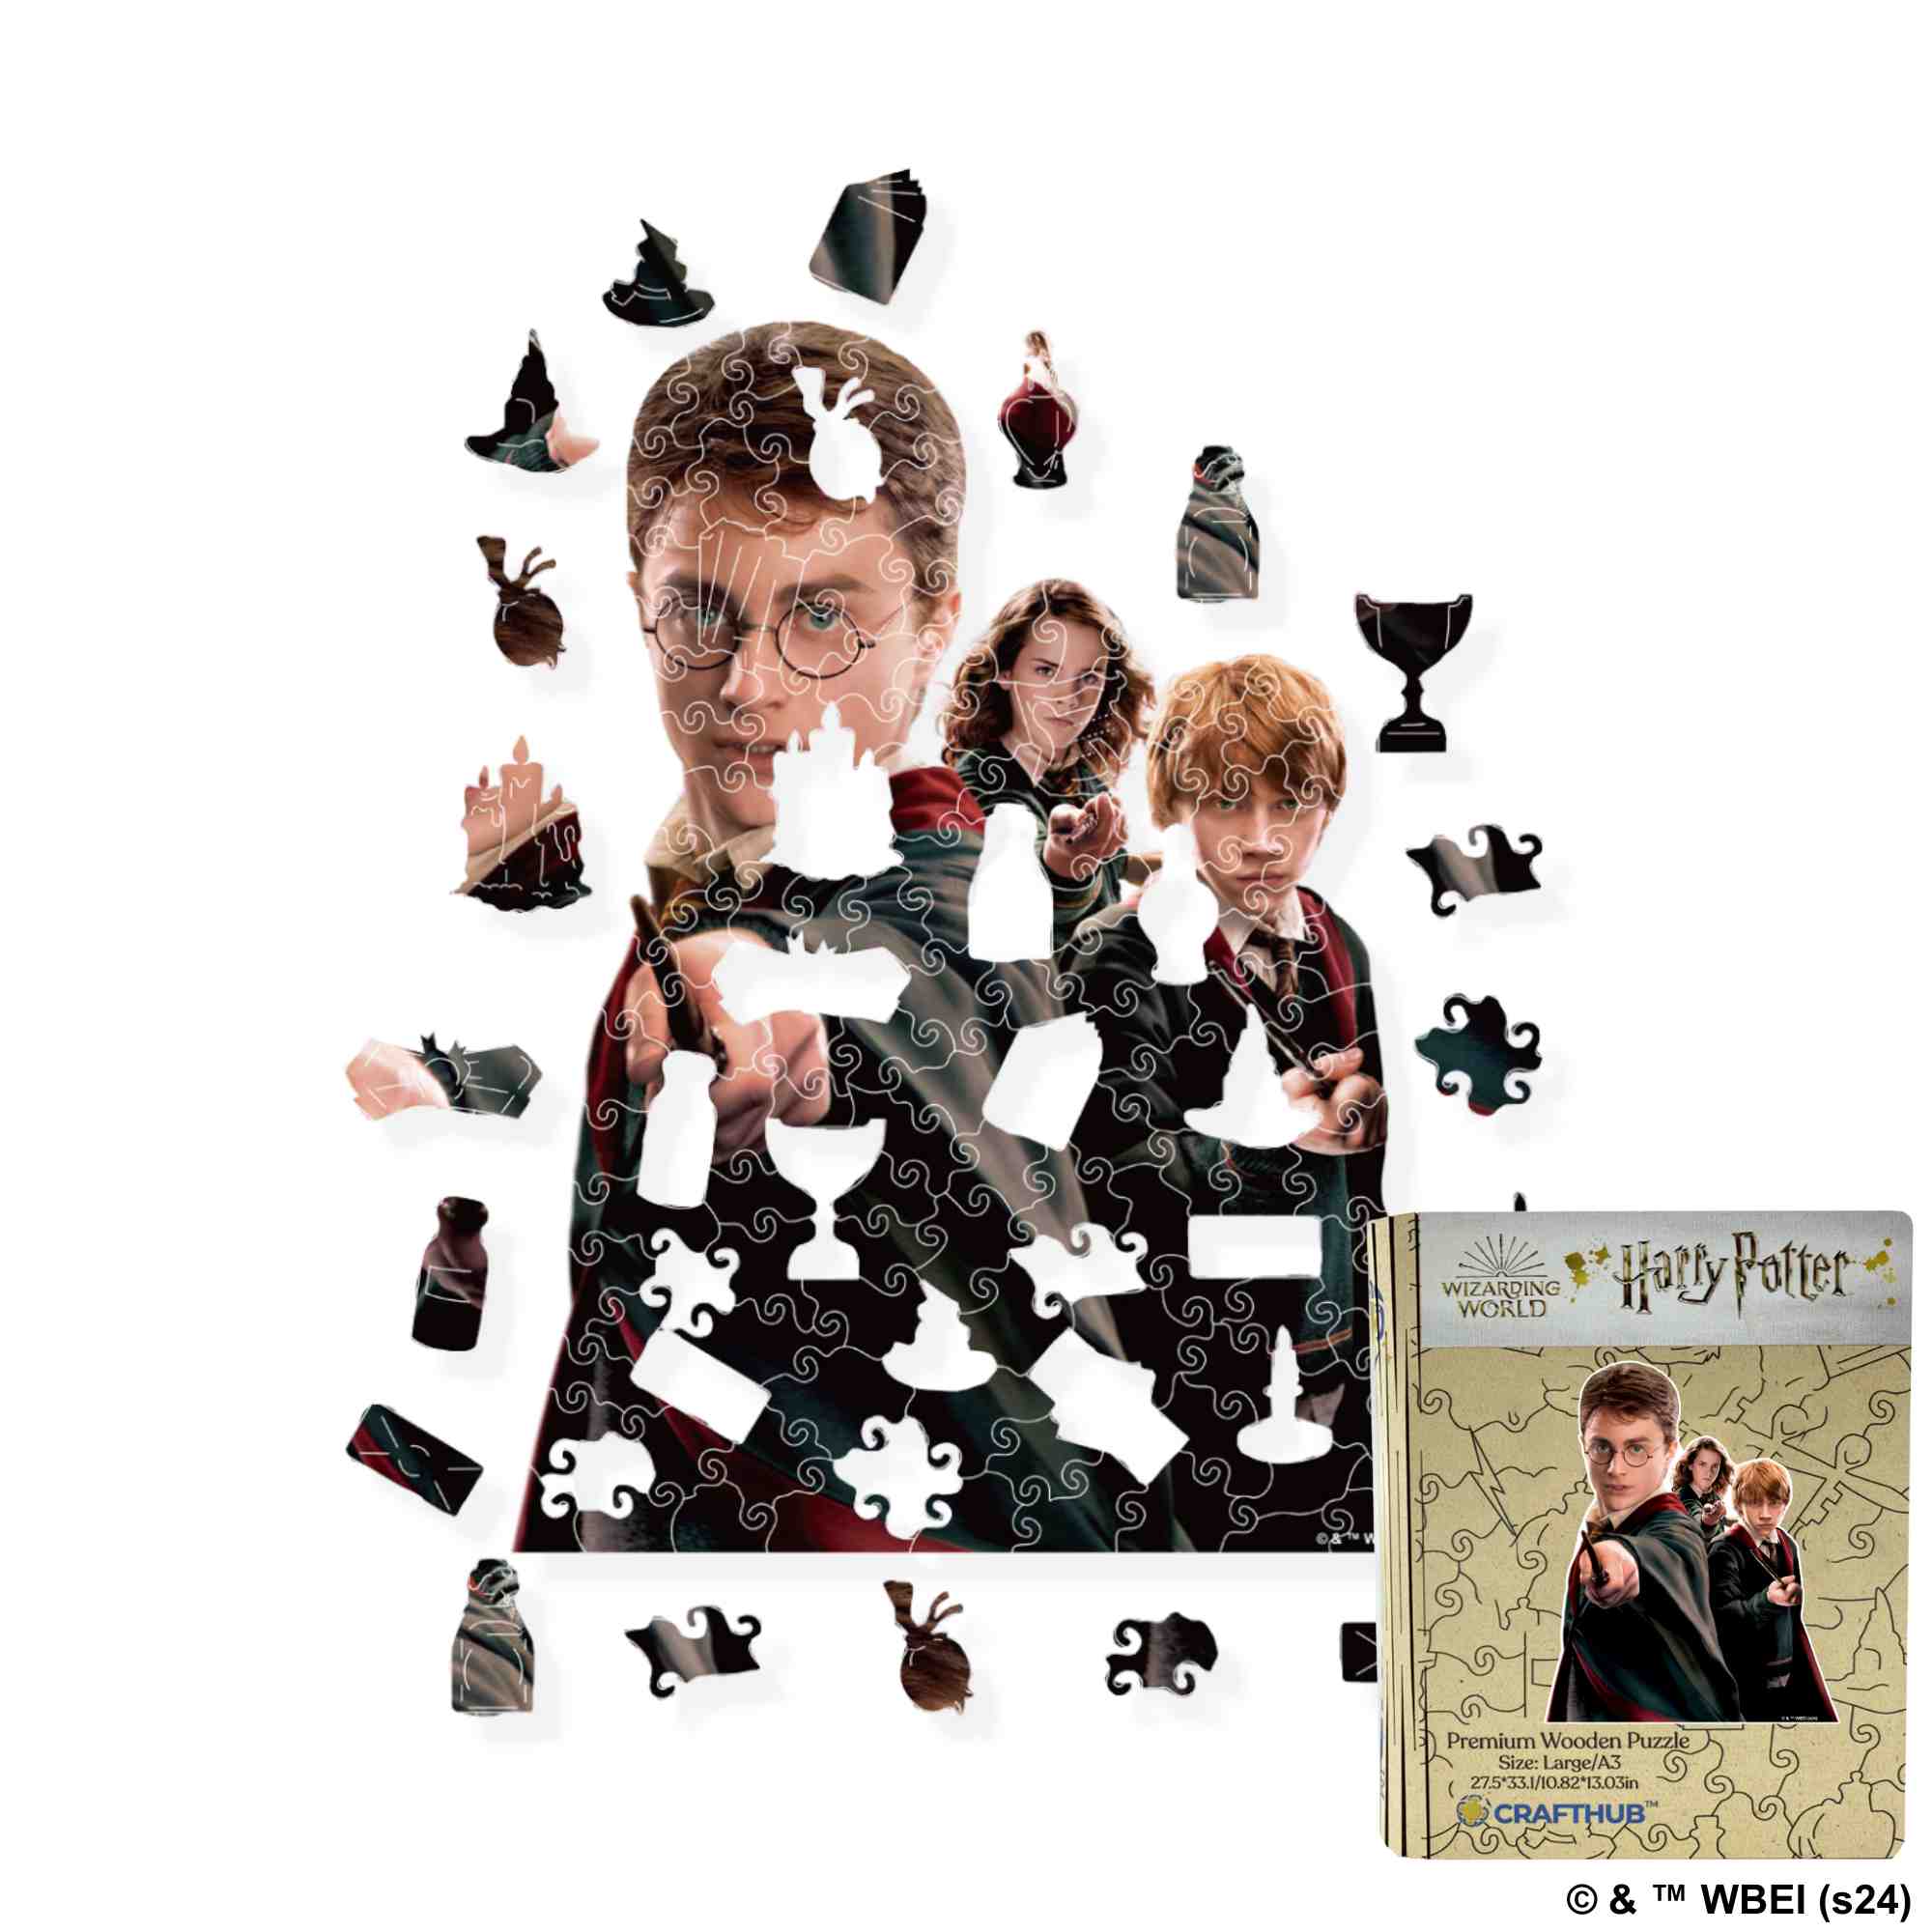 Animal Jigsaw Puzzle > Wooden Jigsaw Puzzle > Jigsaw Puzzle A3 The Wizarding Friends Wooden Jigsaw Puzzle